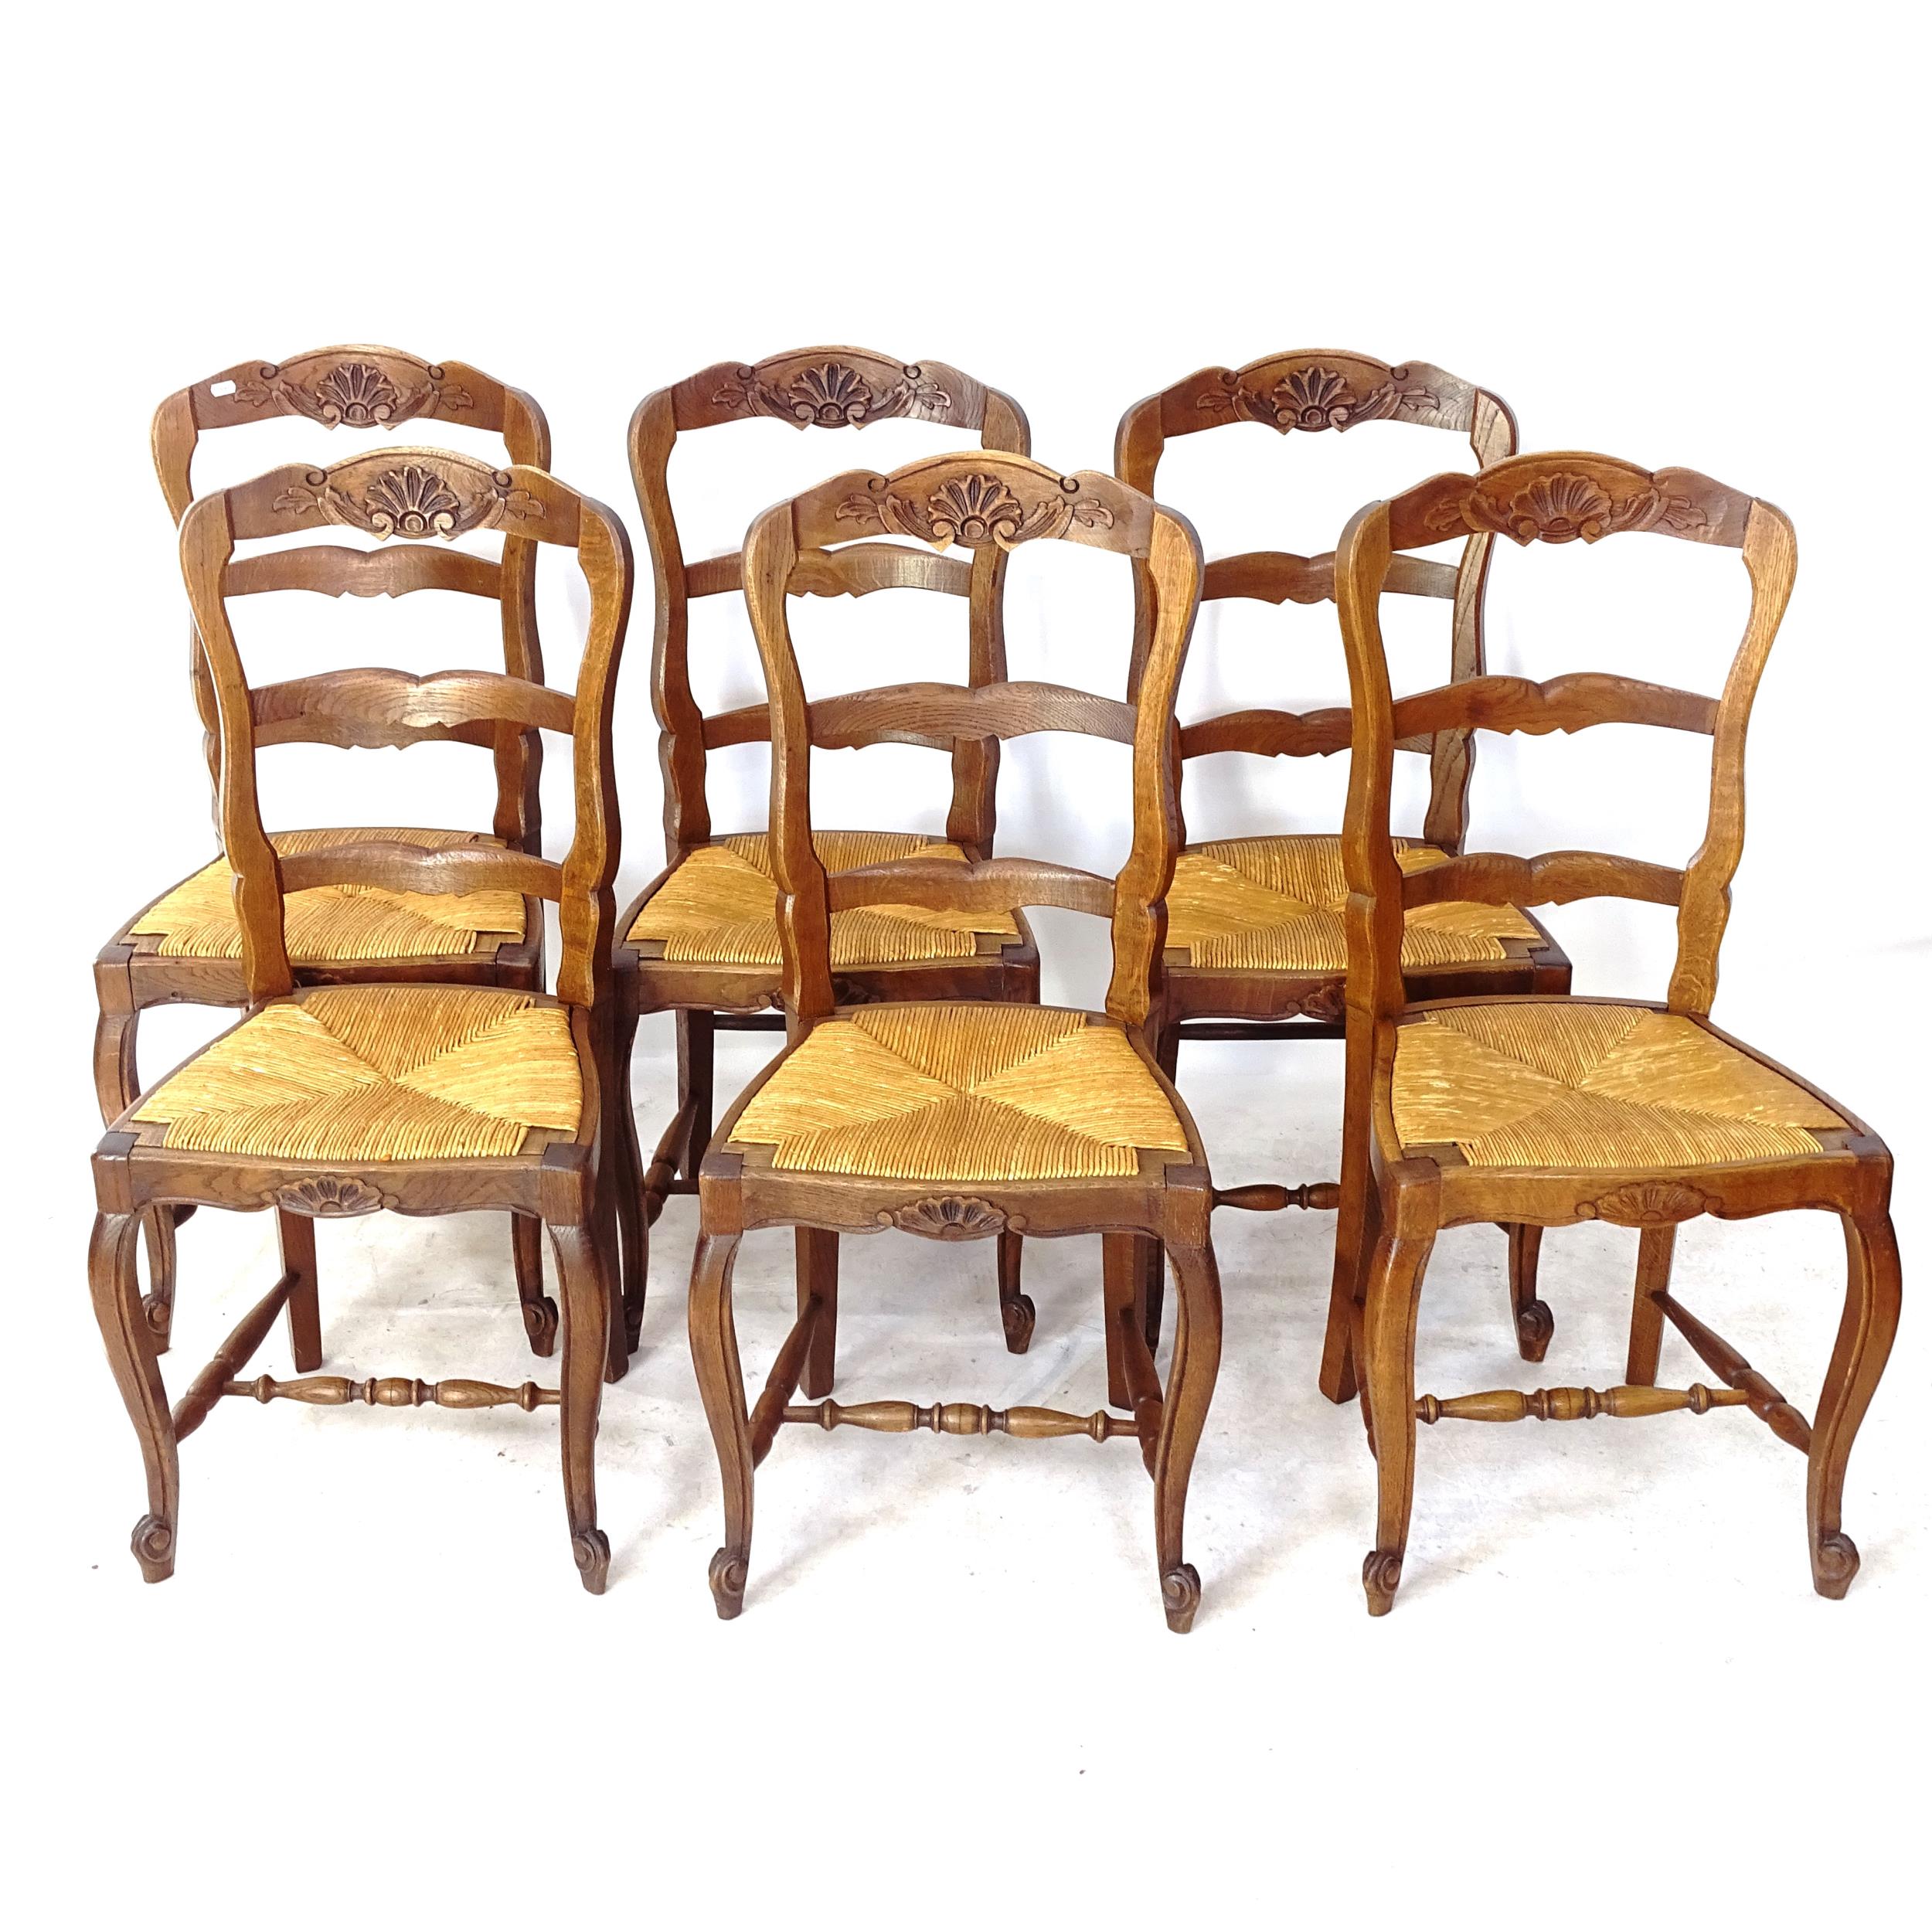 A set of 6 French carved oak ladder-back rush-seated dining chairs